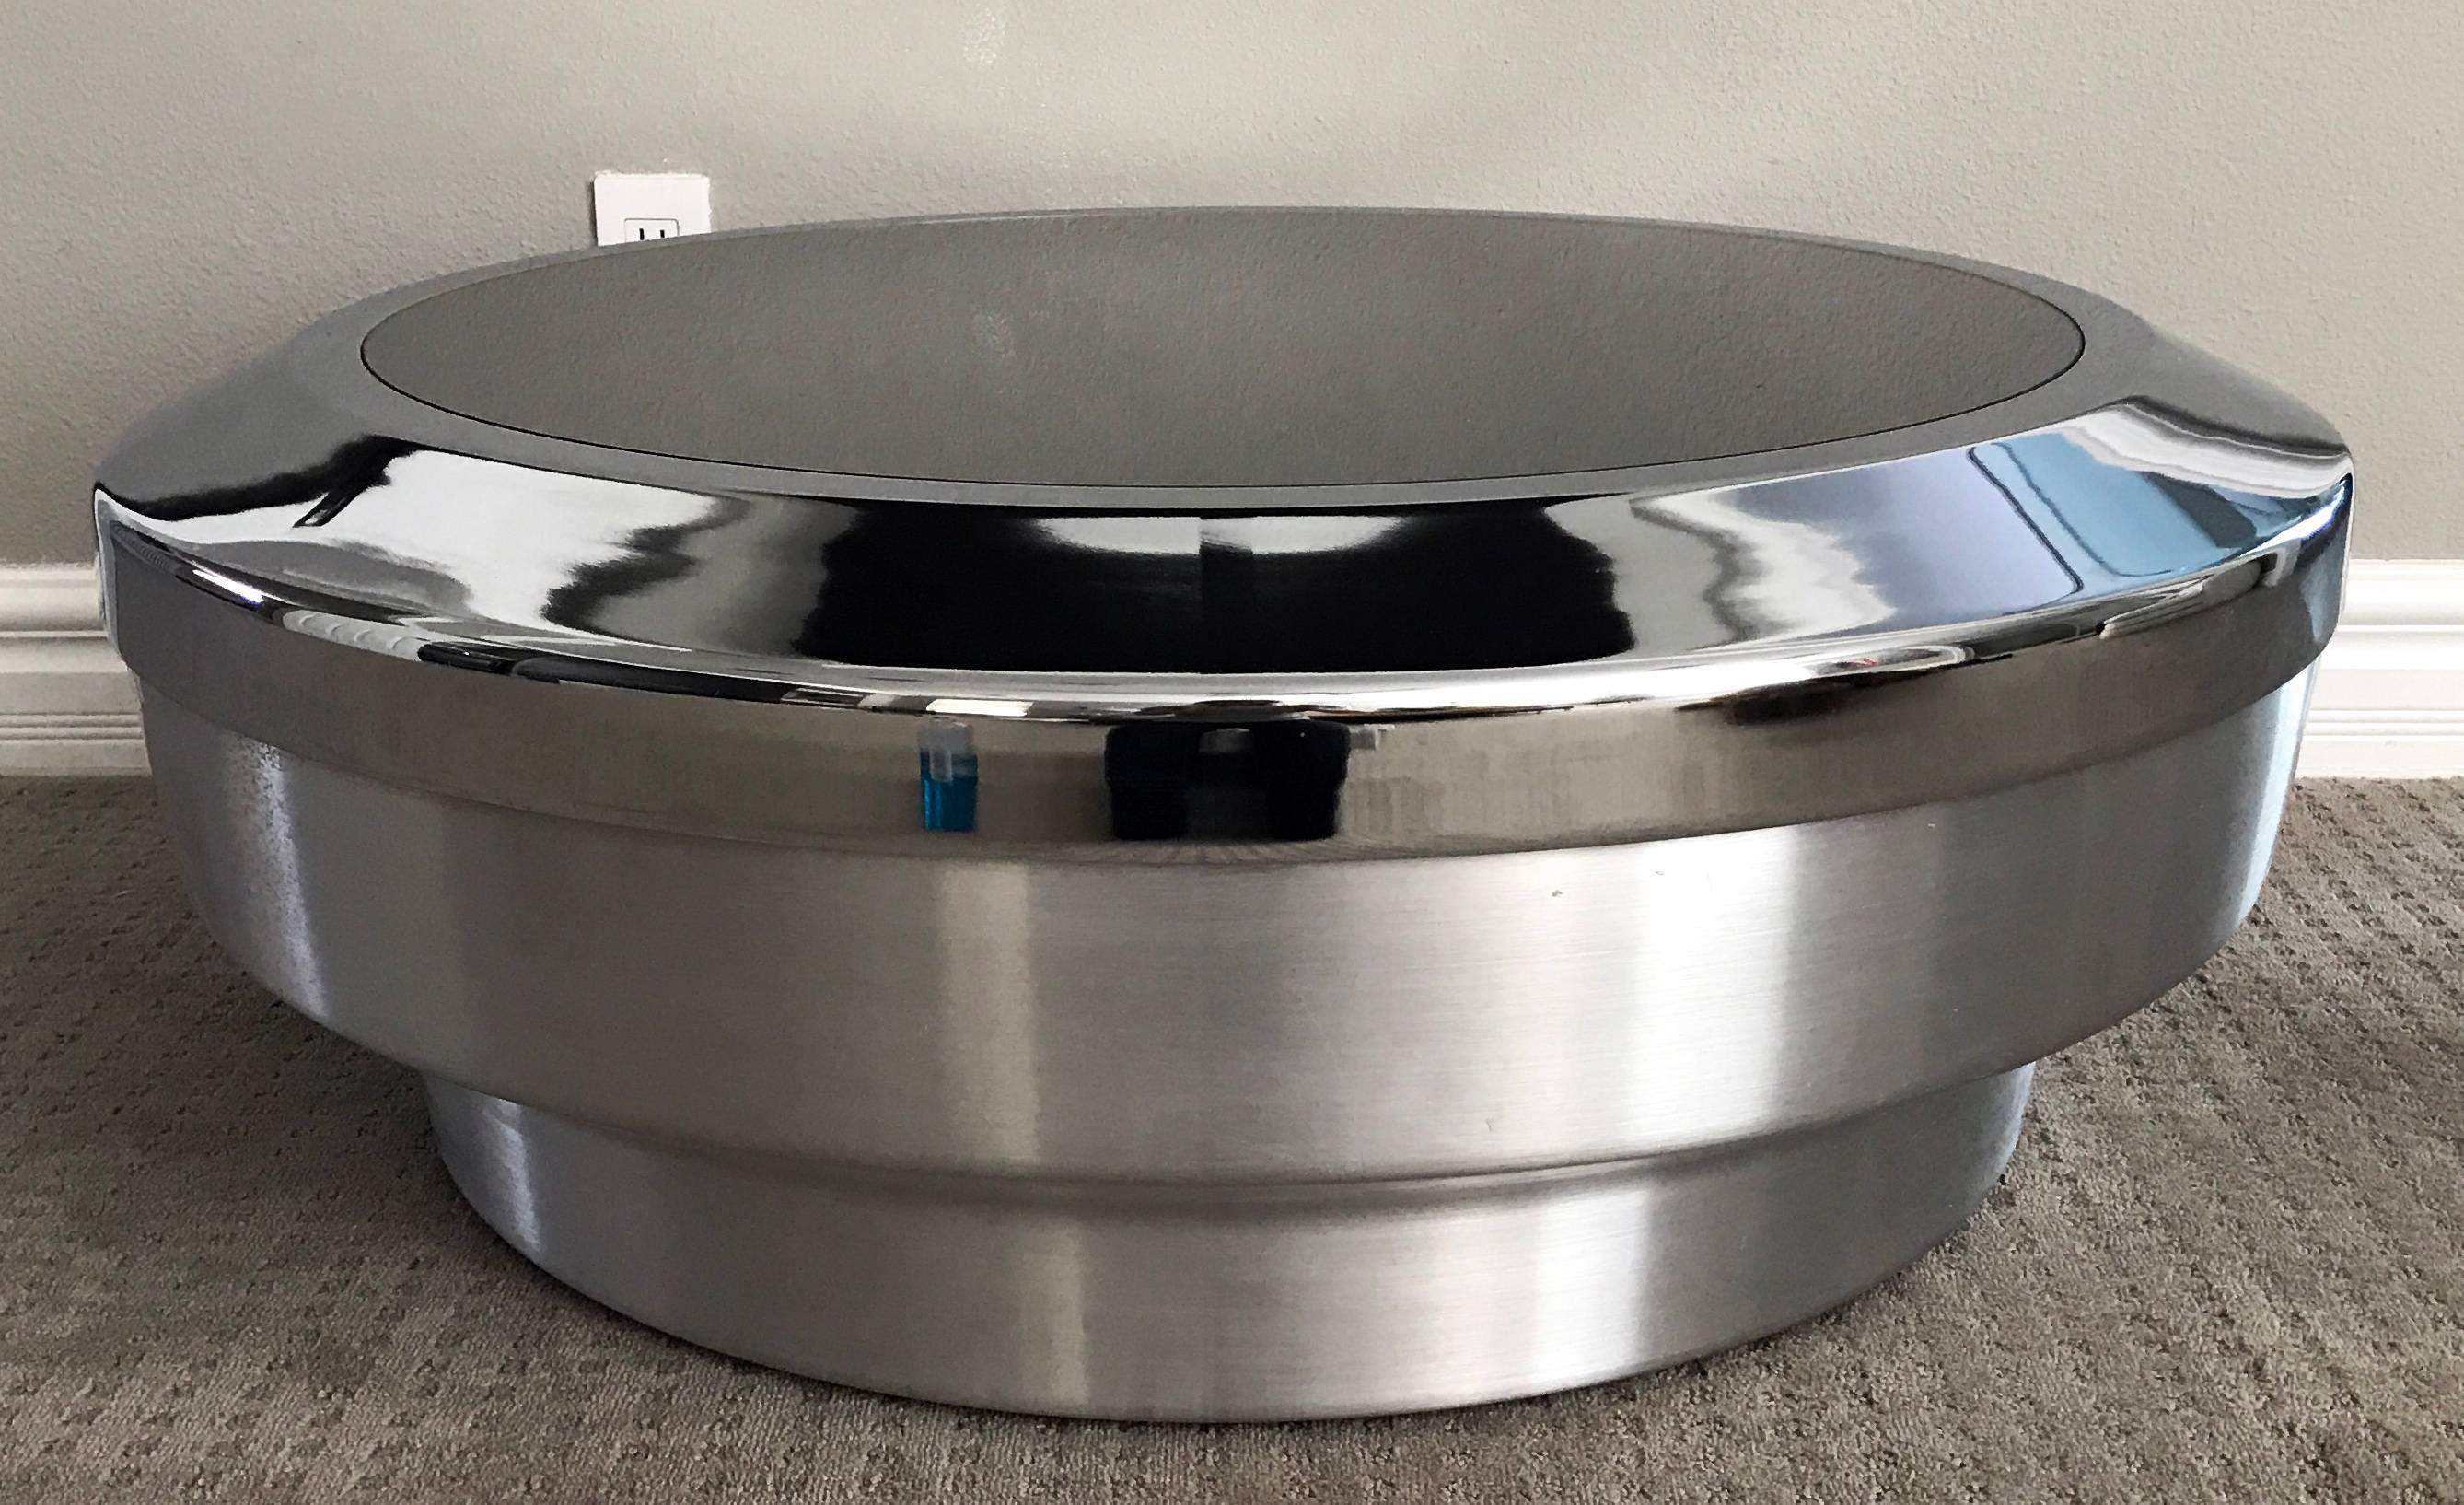 A stunning round, drum/canister coffee table designed by GJ Neville. Often attributed to Mastercraft, this stunning coffee table features a brushed chrome base, with polished chrome outer top and mirrored round top. The table is equal parts mid